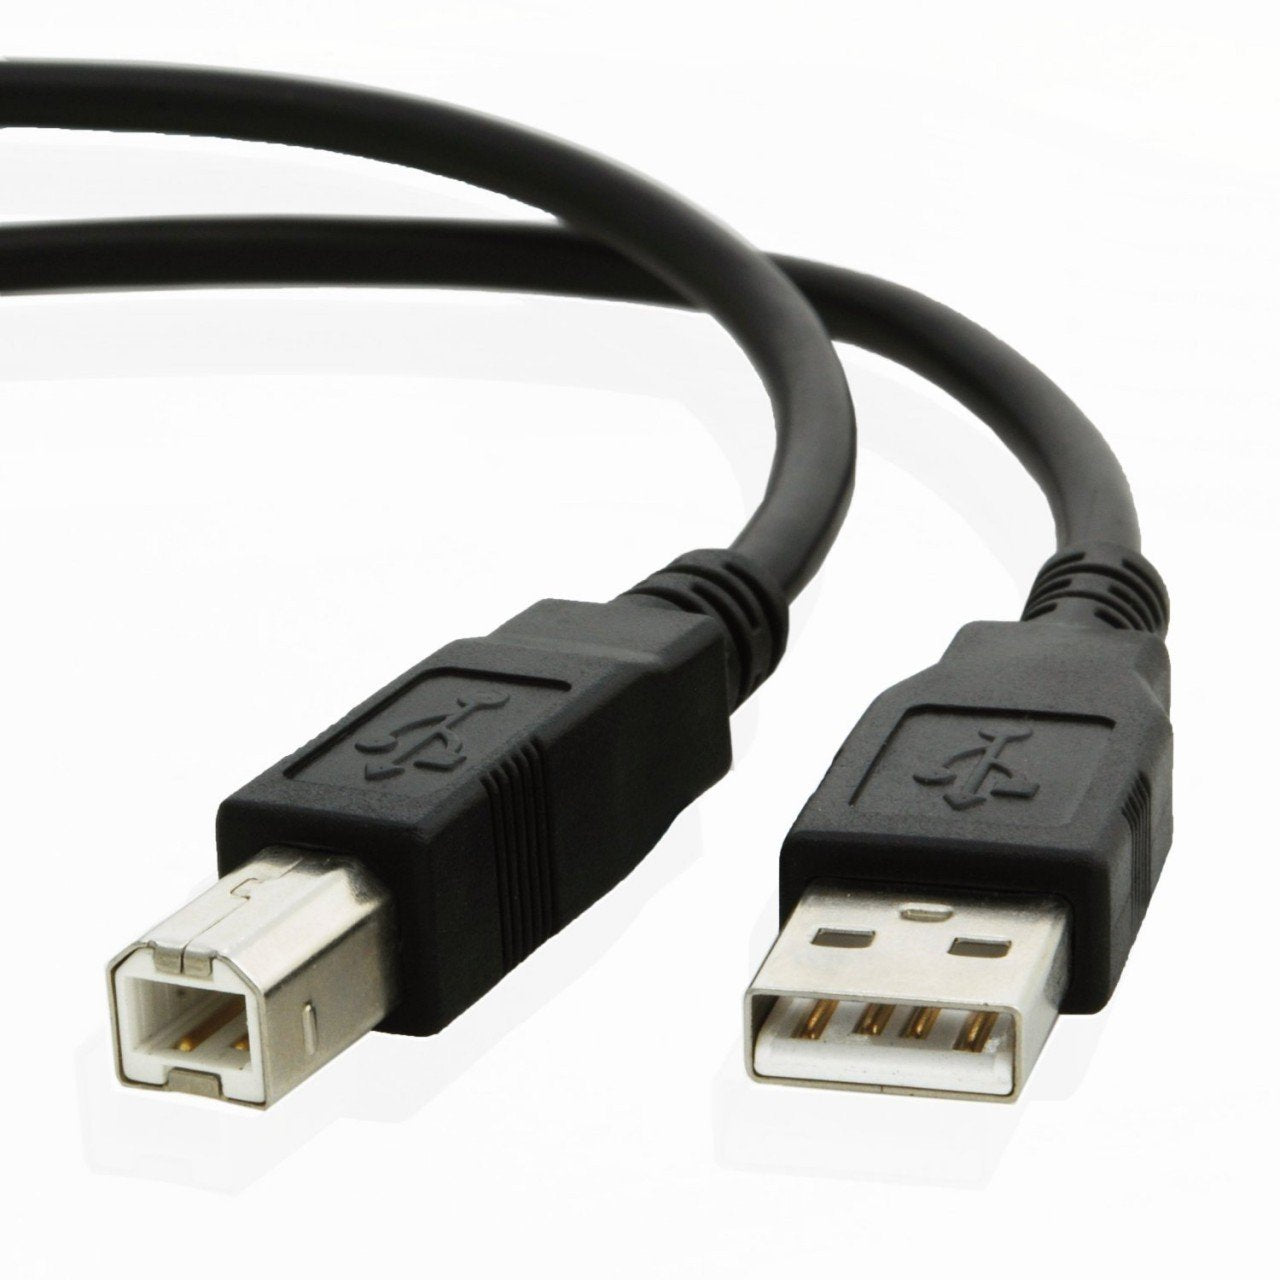 USB cable for Epson BRIGHTLINK 685Wi